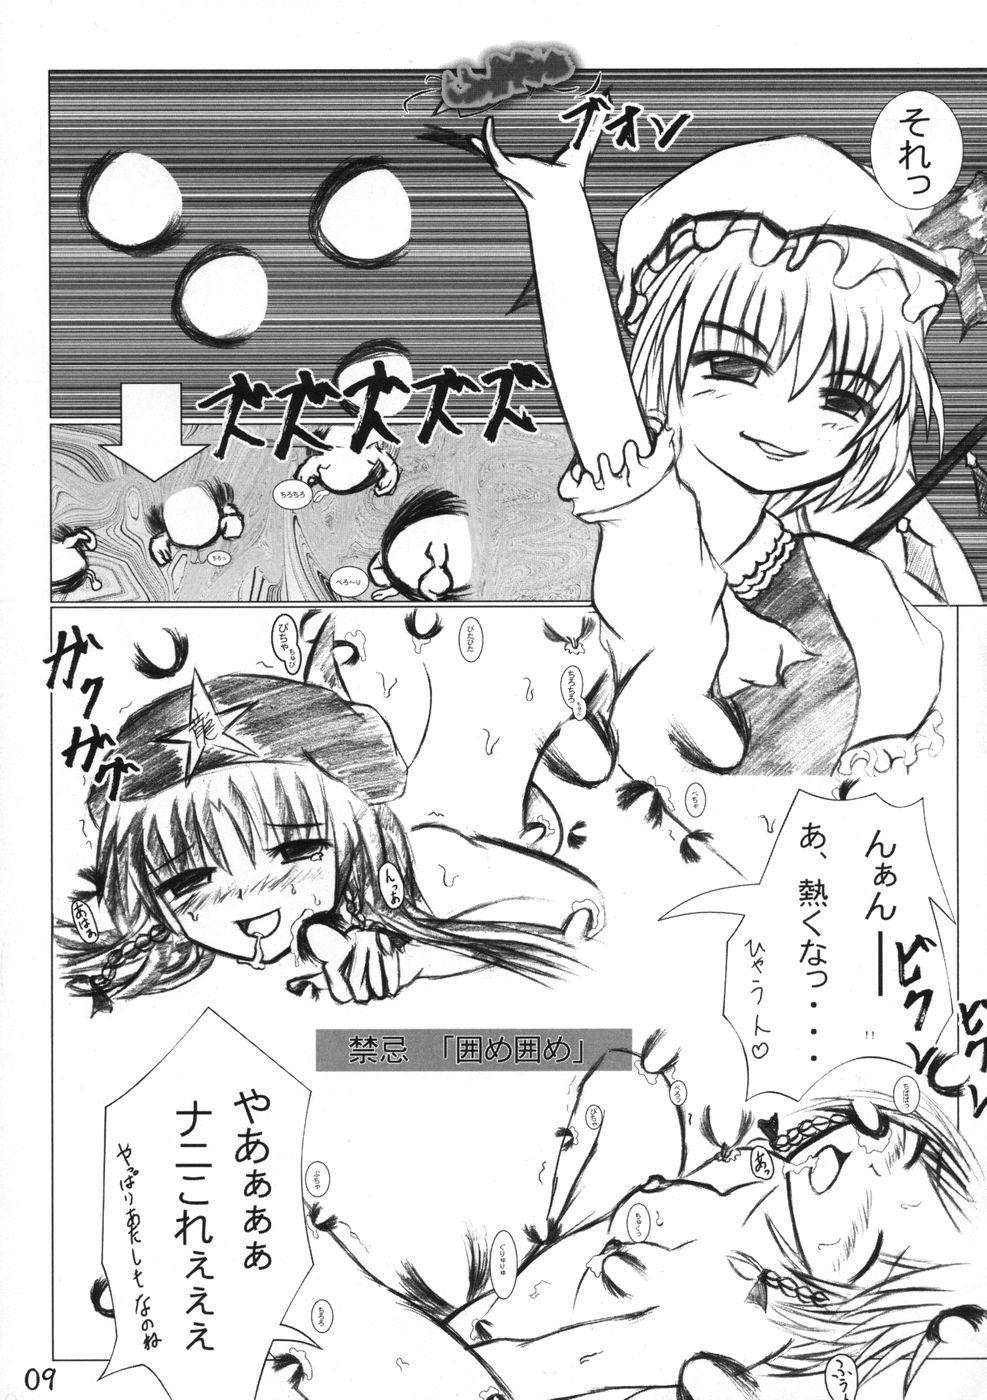 Blow Job 業創りし風 - Touhou project Point Of View - Page 9